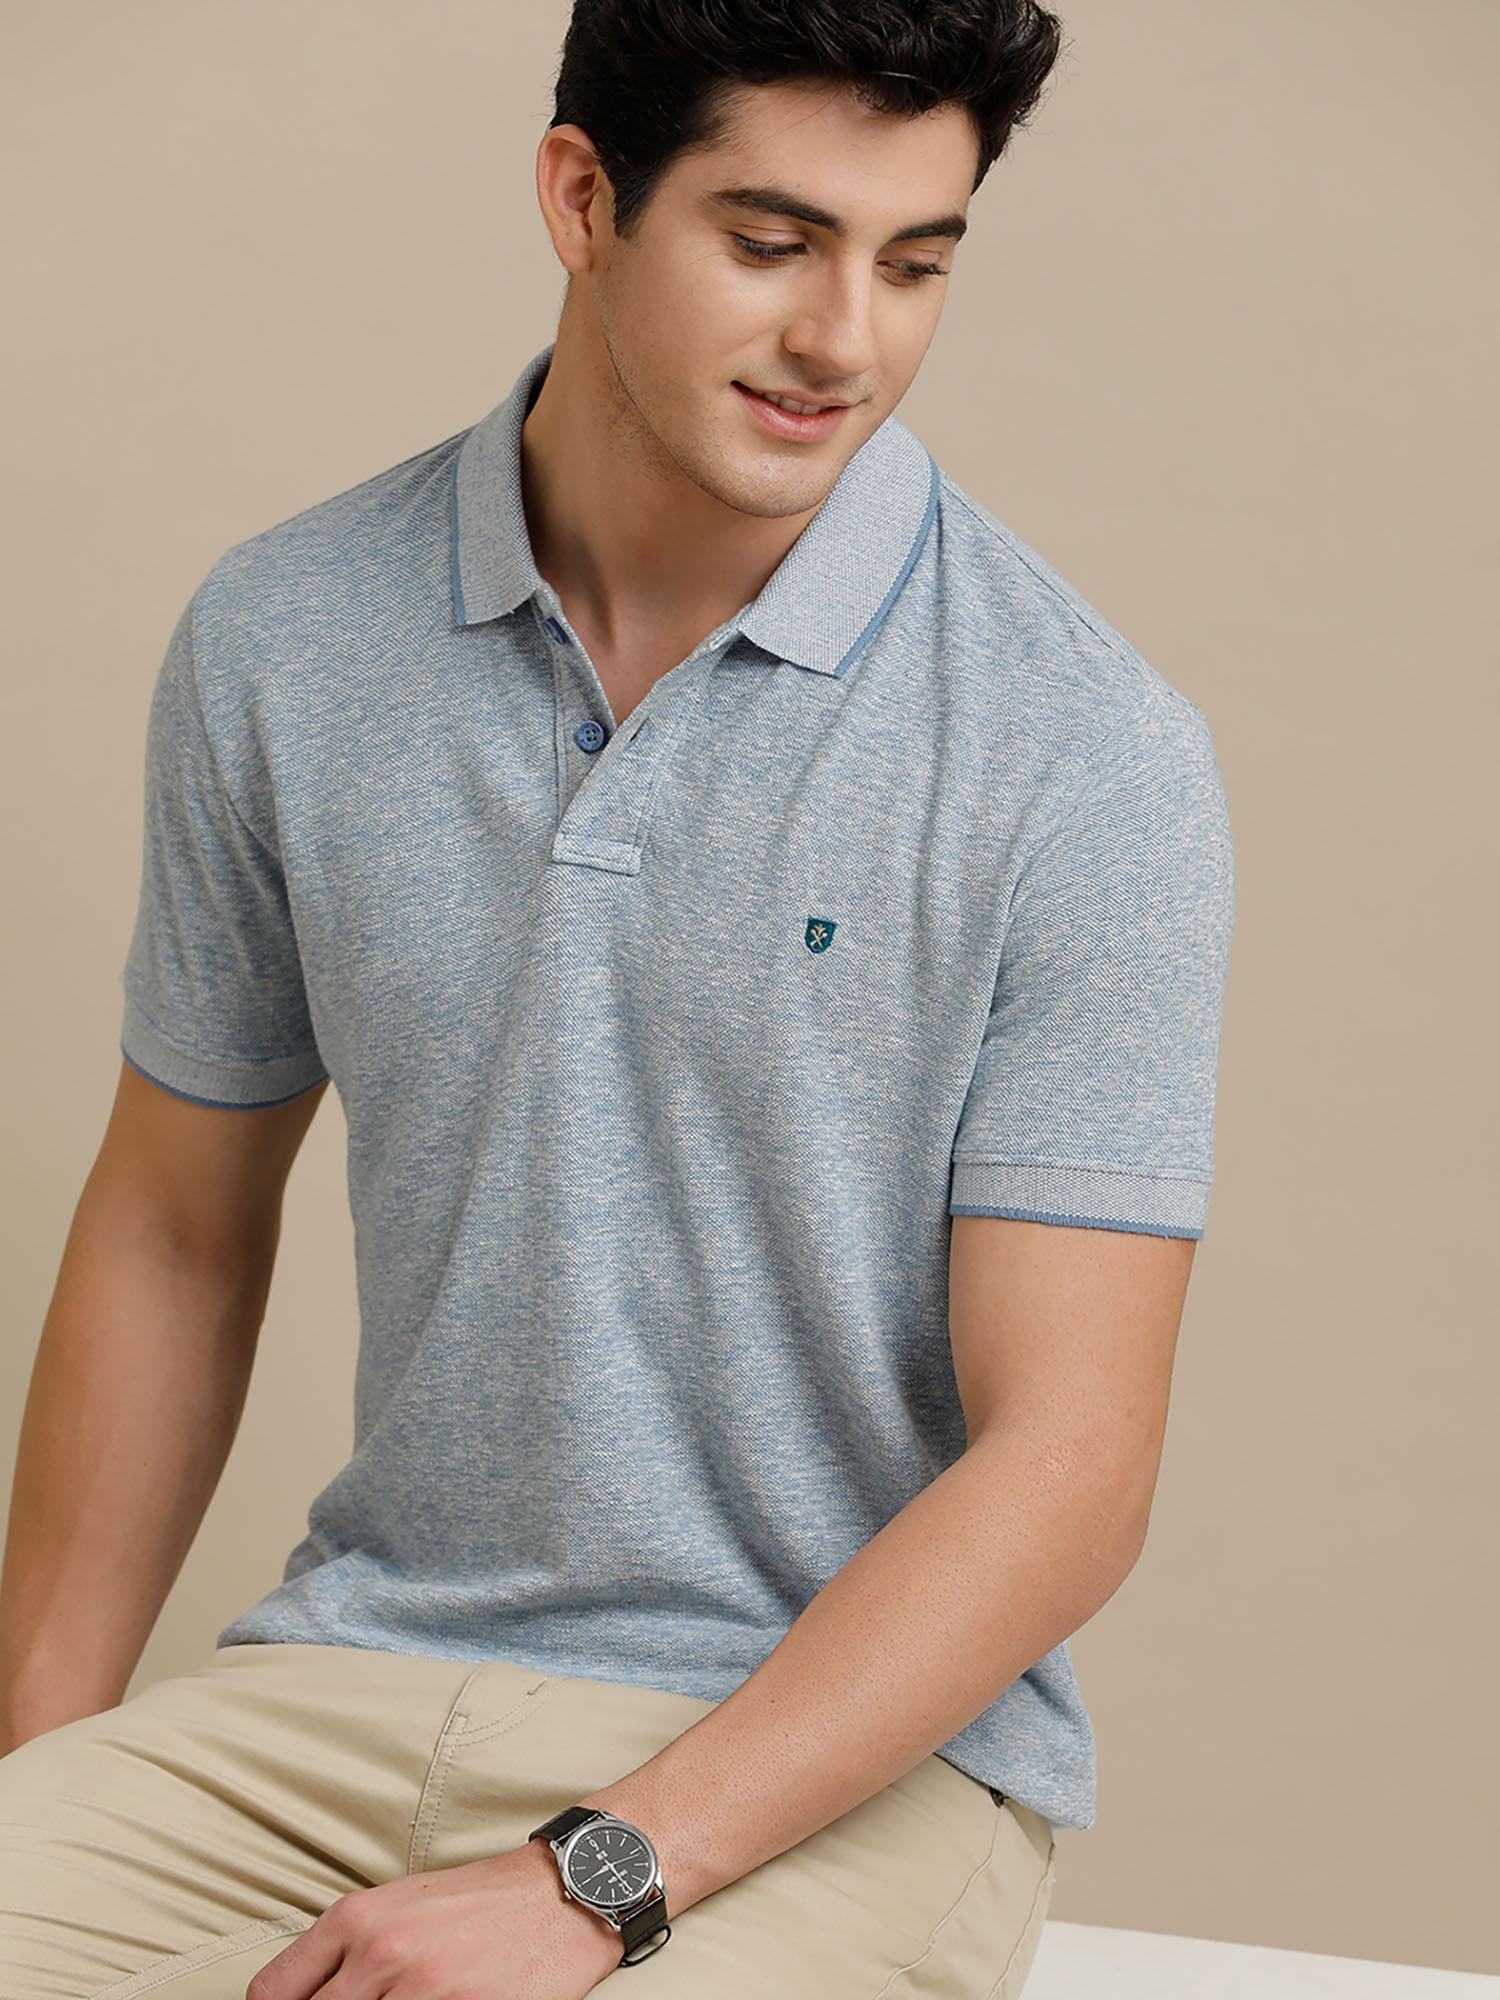 circular knit polo neck blue solid half sleeve t-shirt for men